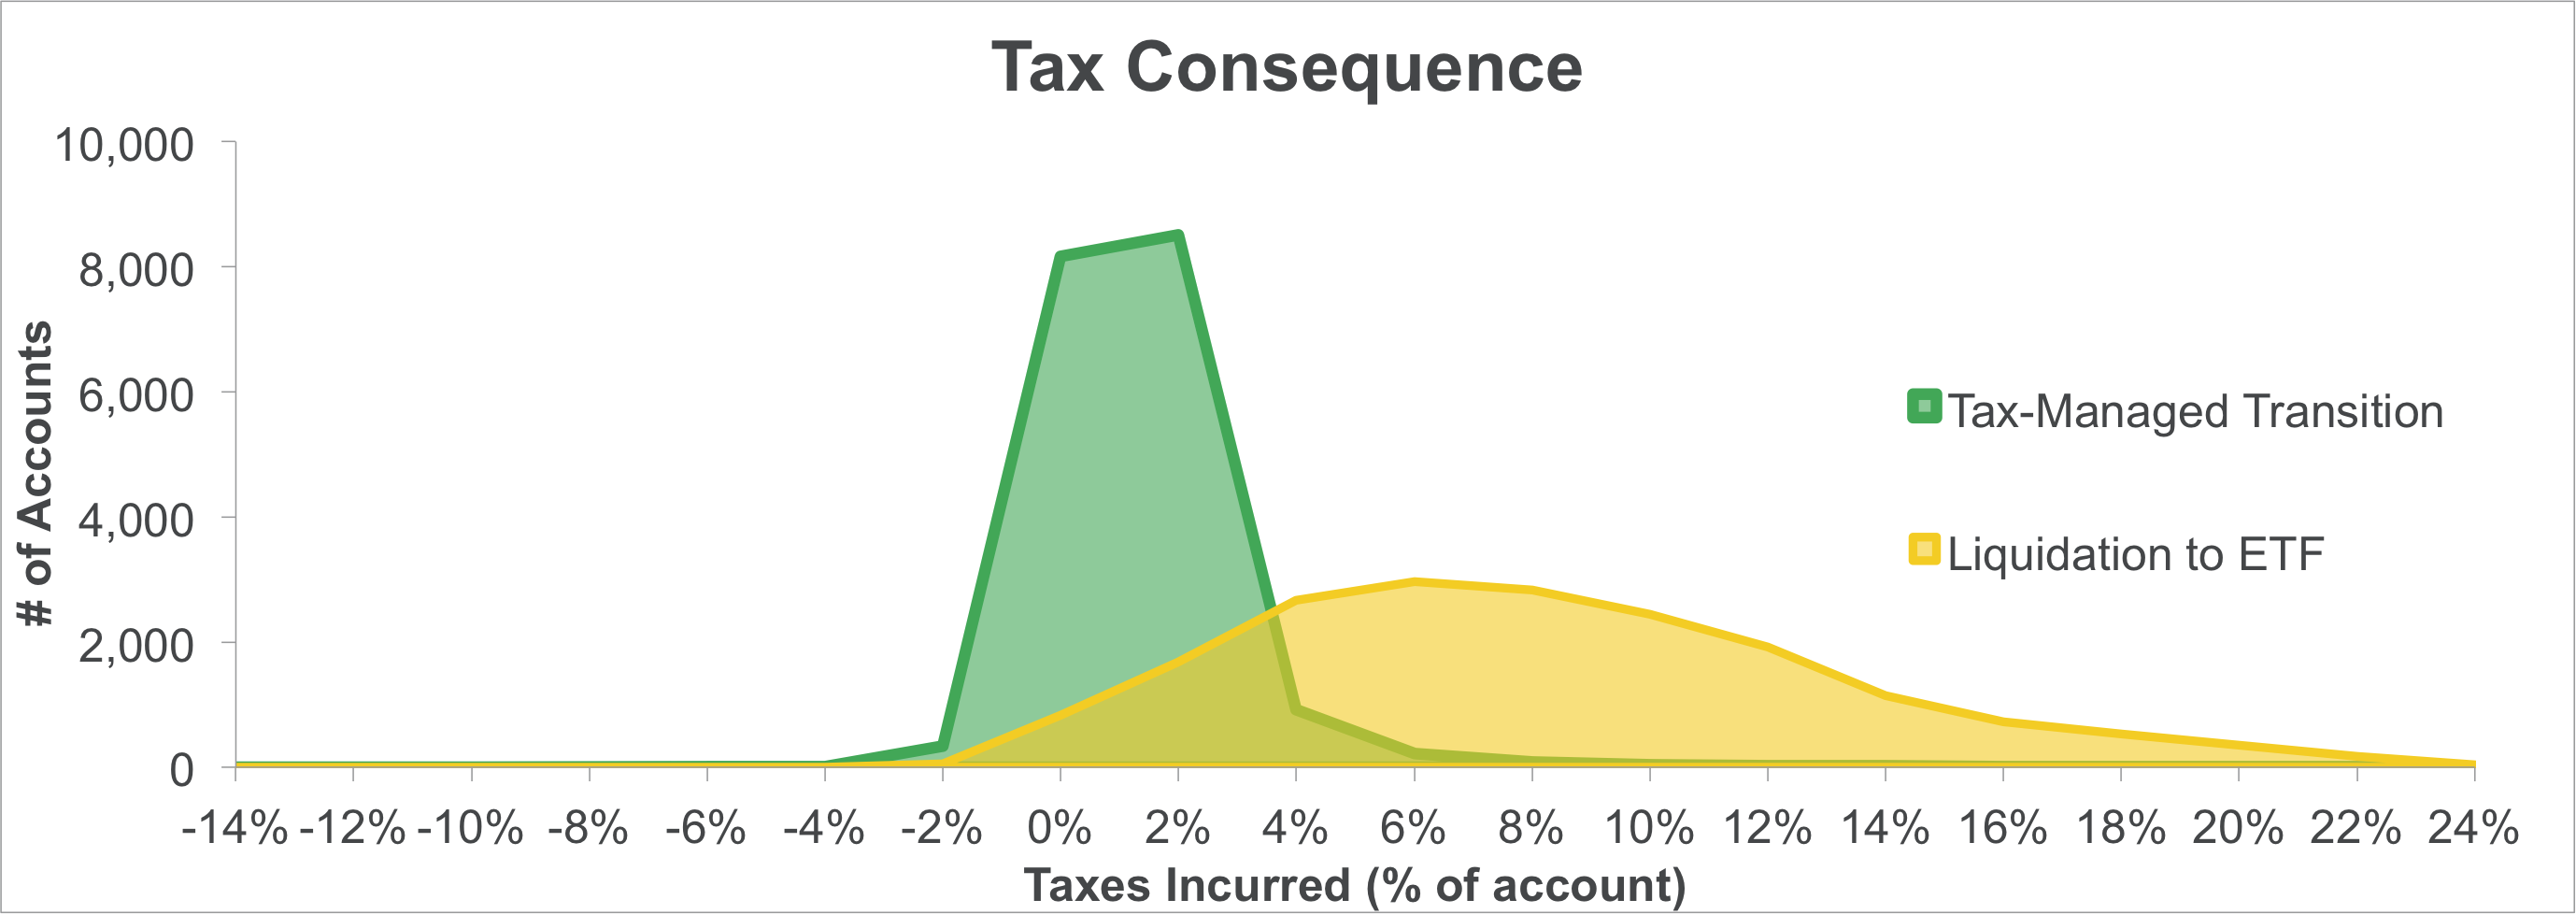 tax_consequence_final.png